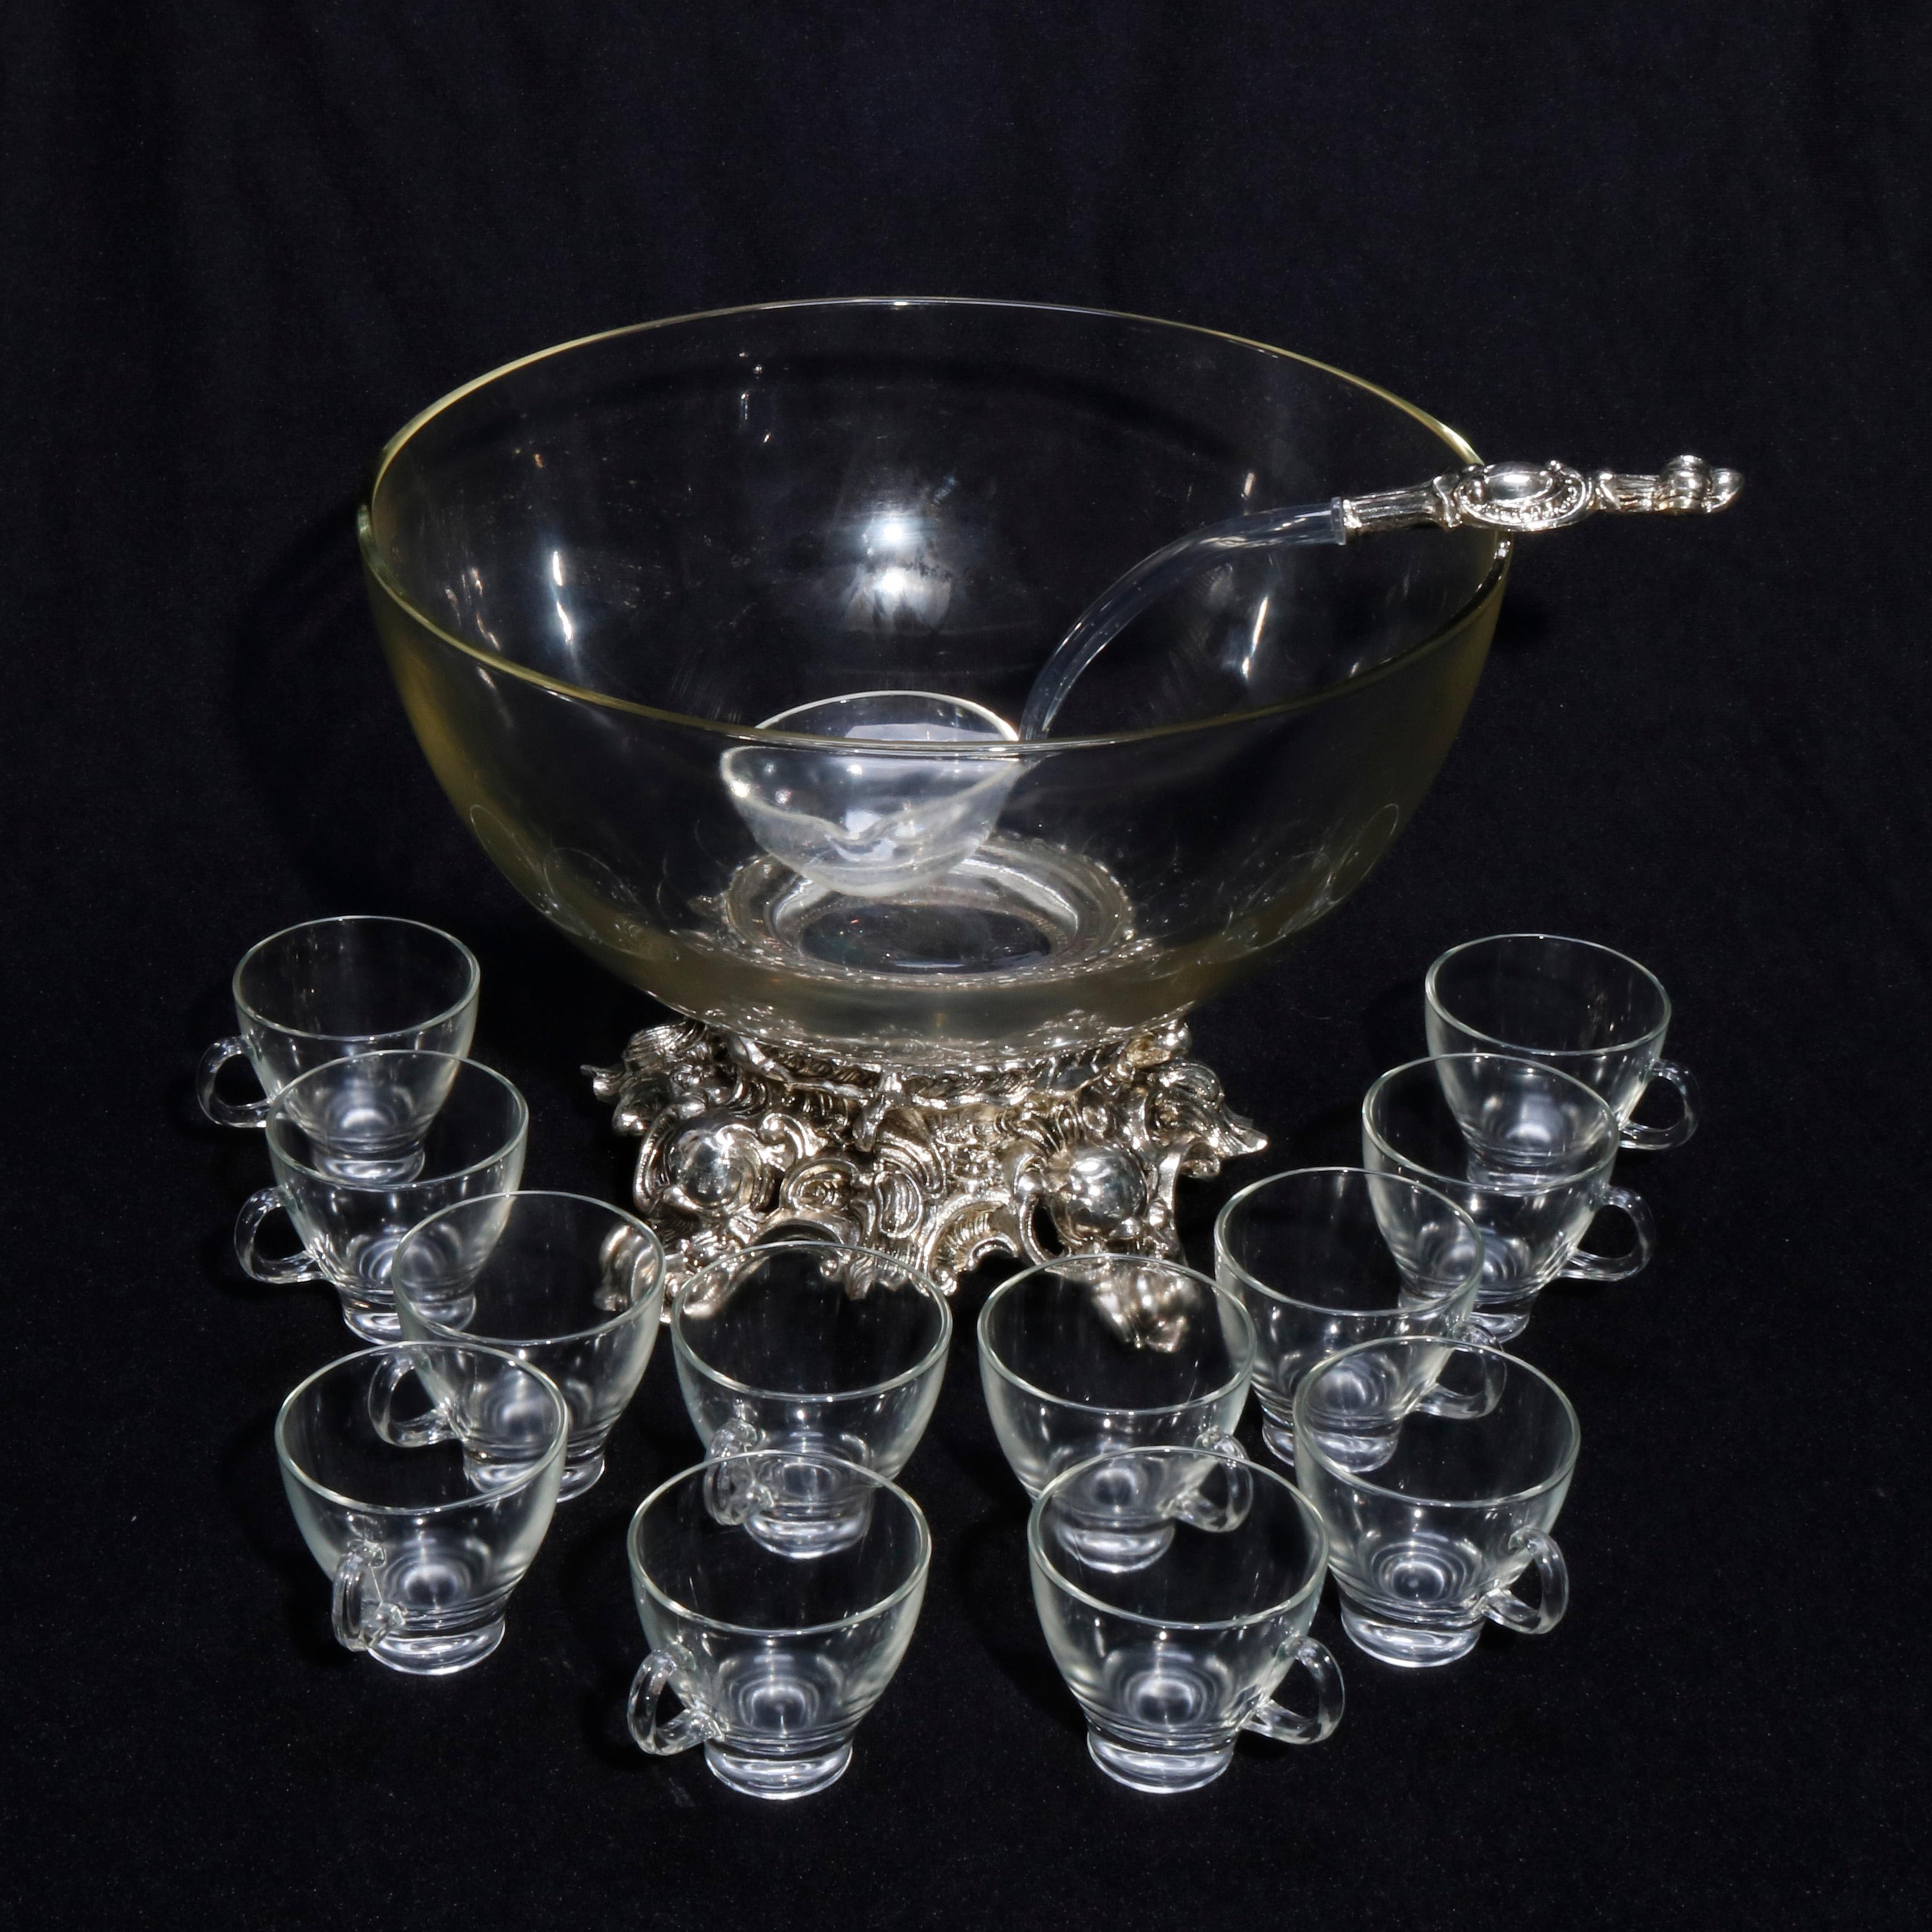 A vintage punch bowl set offers elegant glass serving bowl seated on silver plate foliate and scroll form footed base and includes 12 handled glass cups and matching ladle, circa 1950

Measures - punch bowl: 9.25